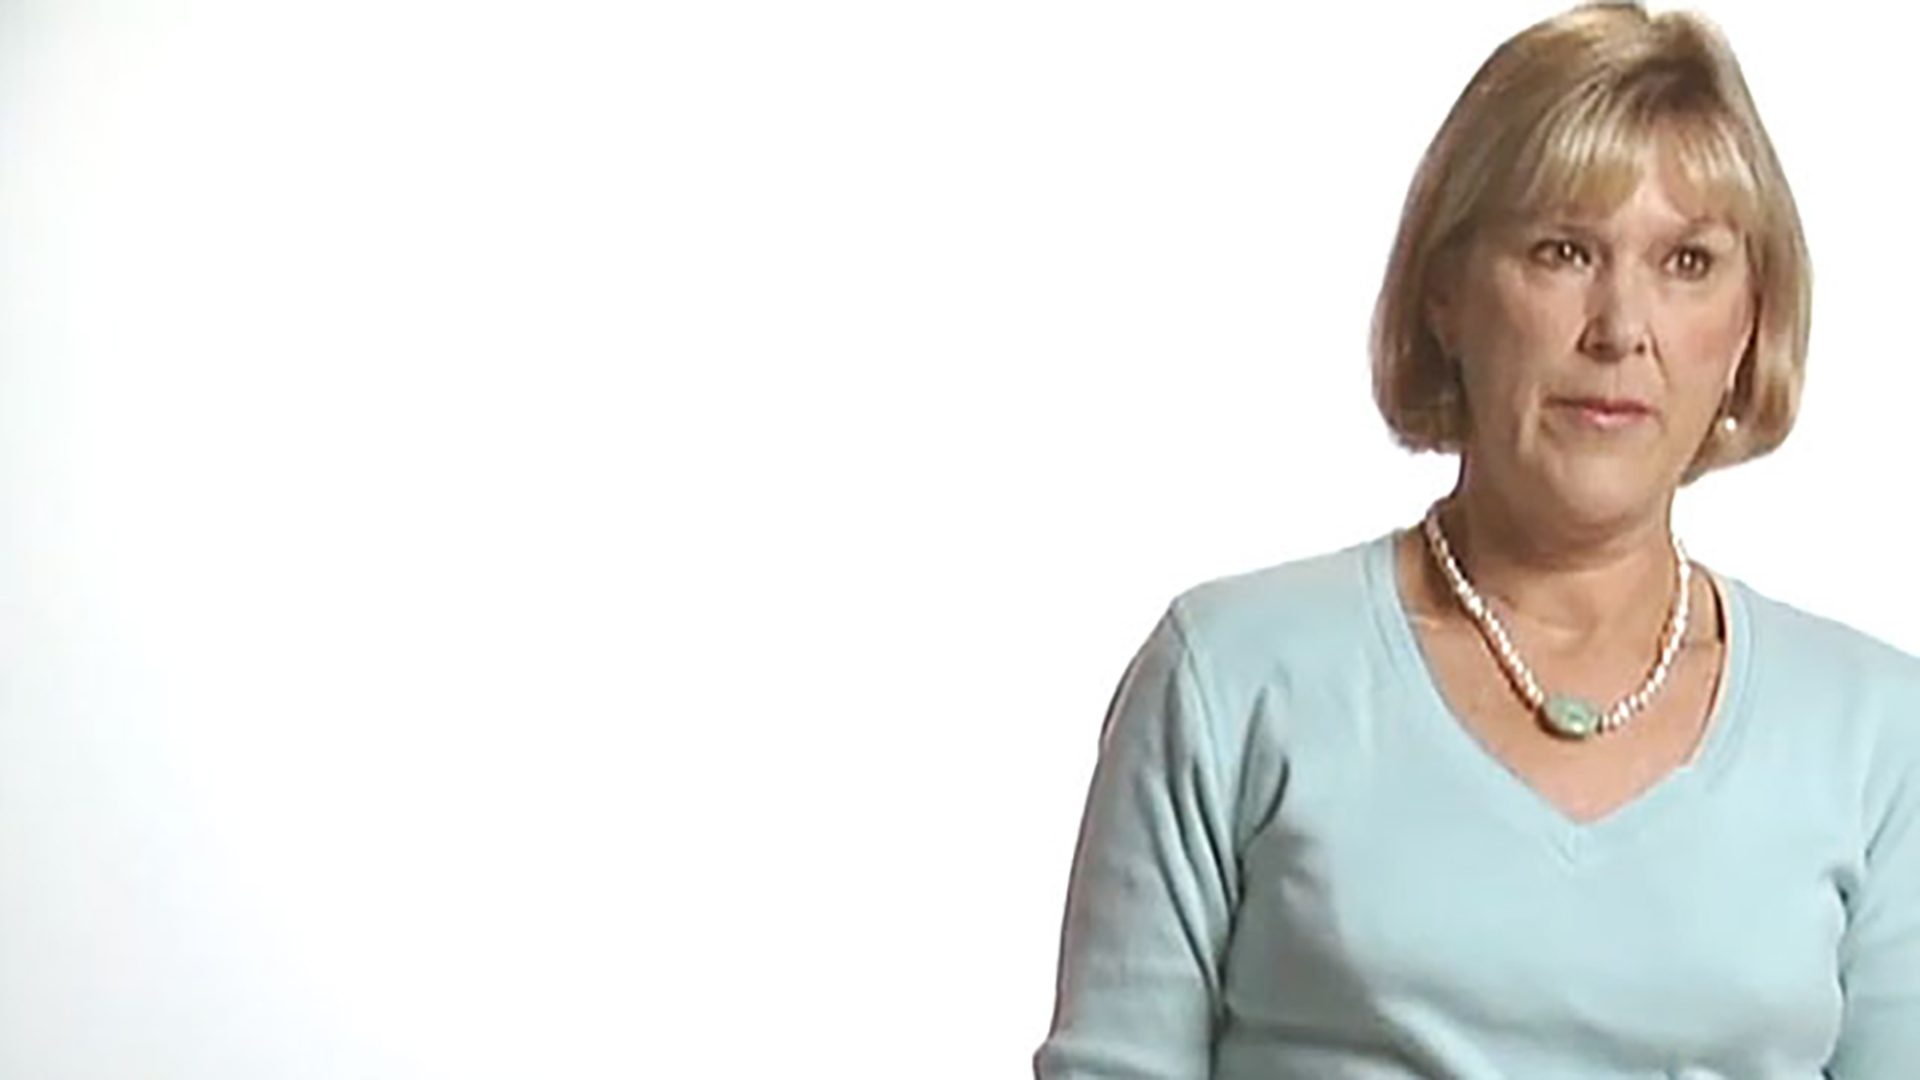 A middle-aged woman with a blonde bob haircut wears a light blue long-sleeved shirt and is interviewed against a white background.